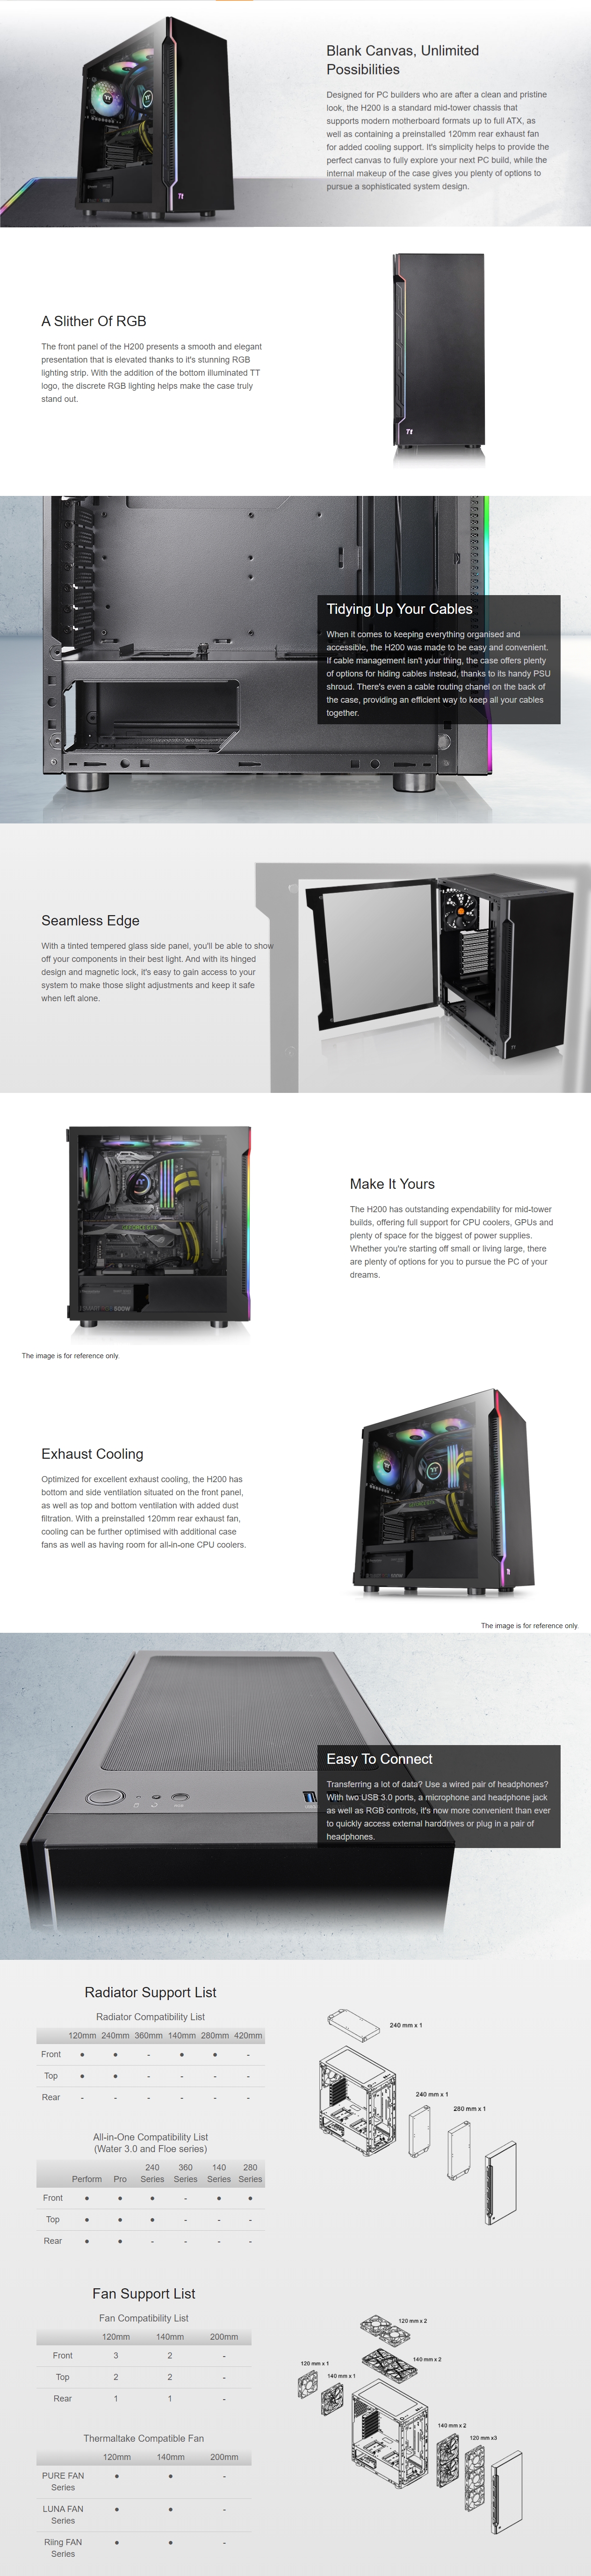 A large marketing image providing additional information about the product Thermaltake H200 - Mid Tower Case (Black) - Additional alt info not provided